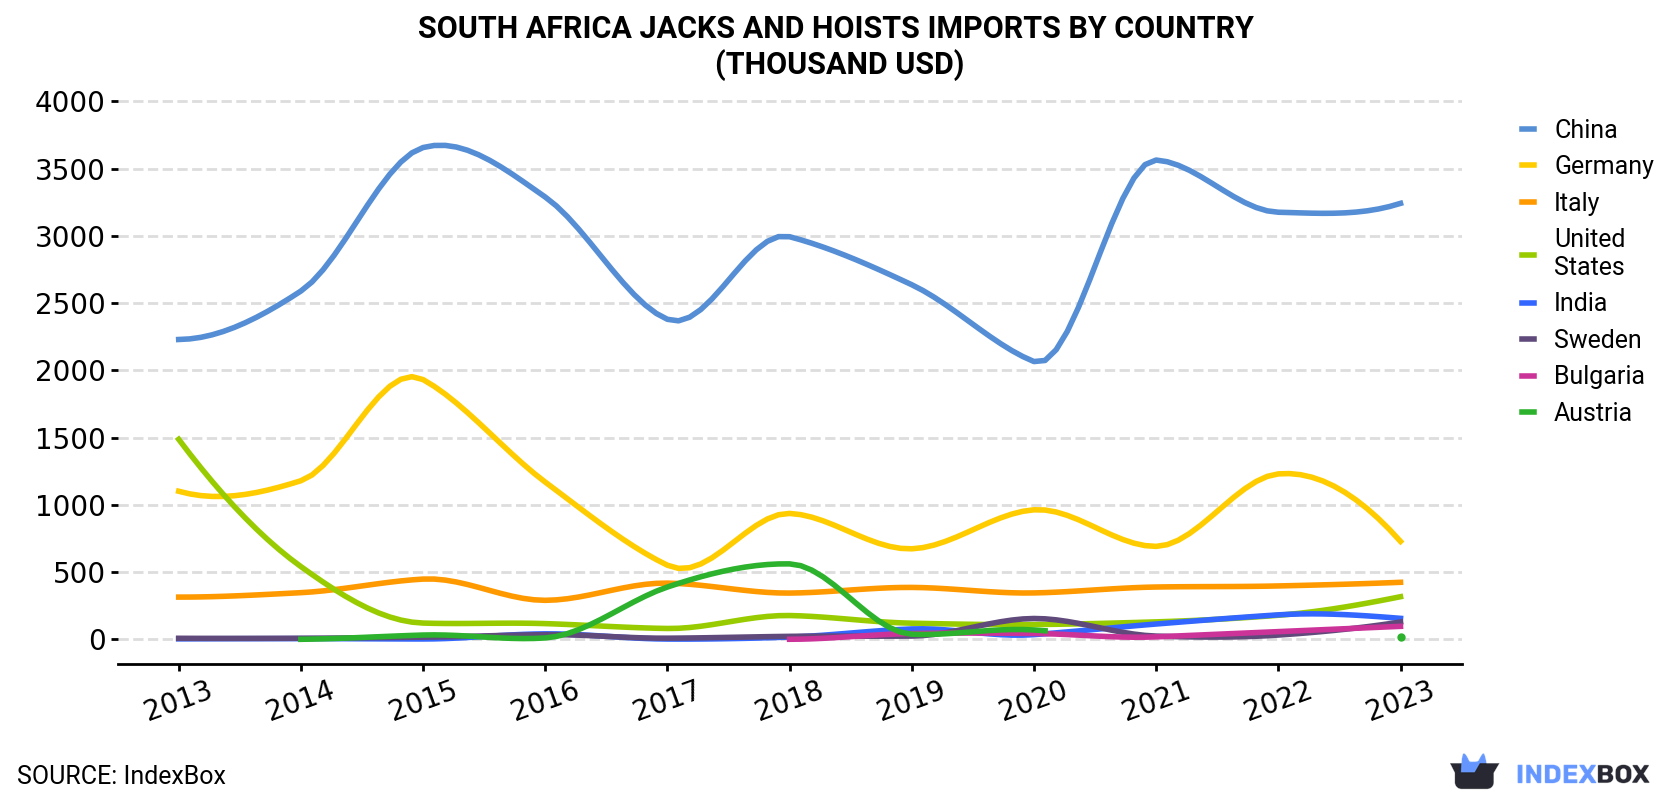 South Africa Jacks And Hoists Imports By Country (Thousand USD)